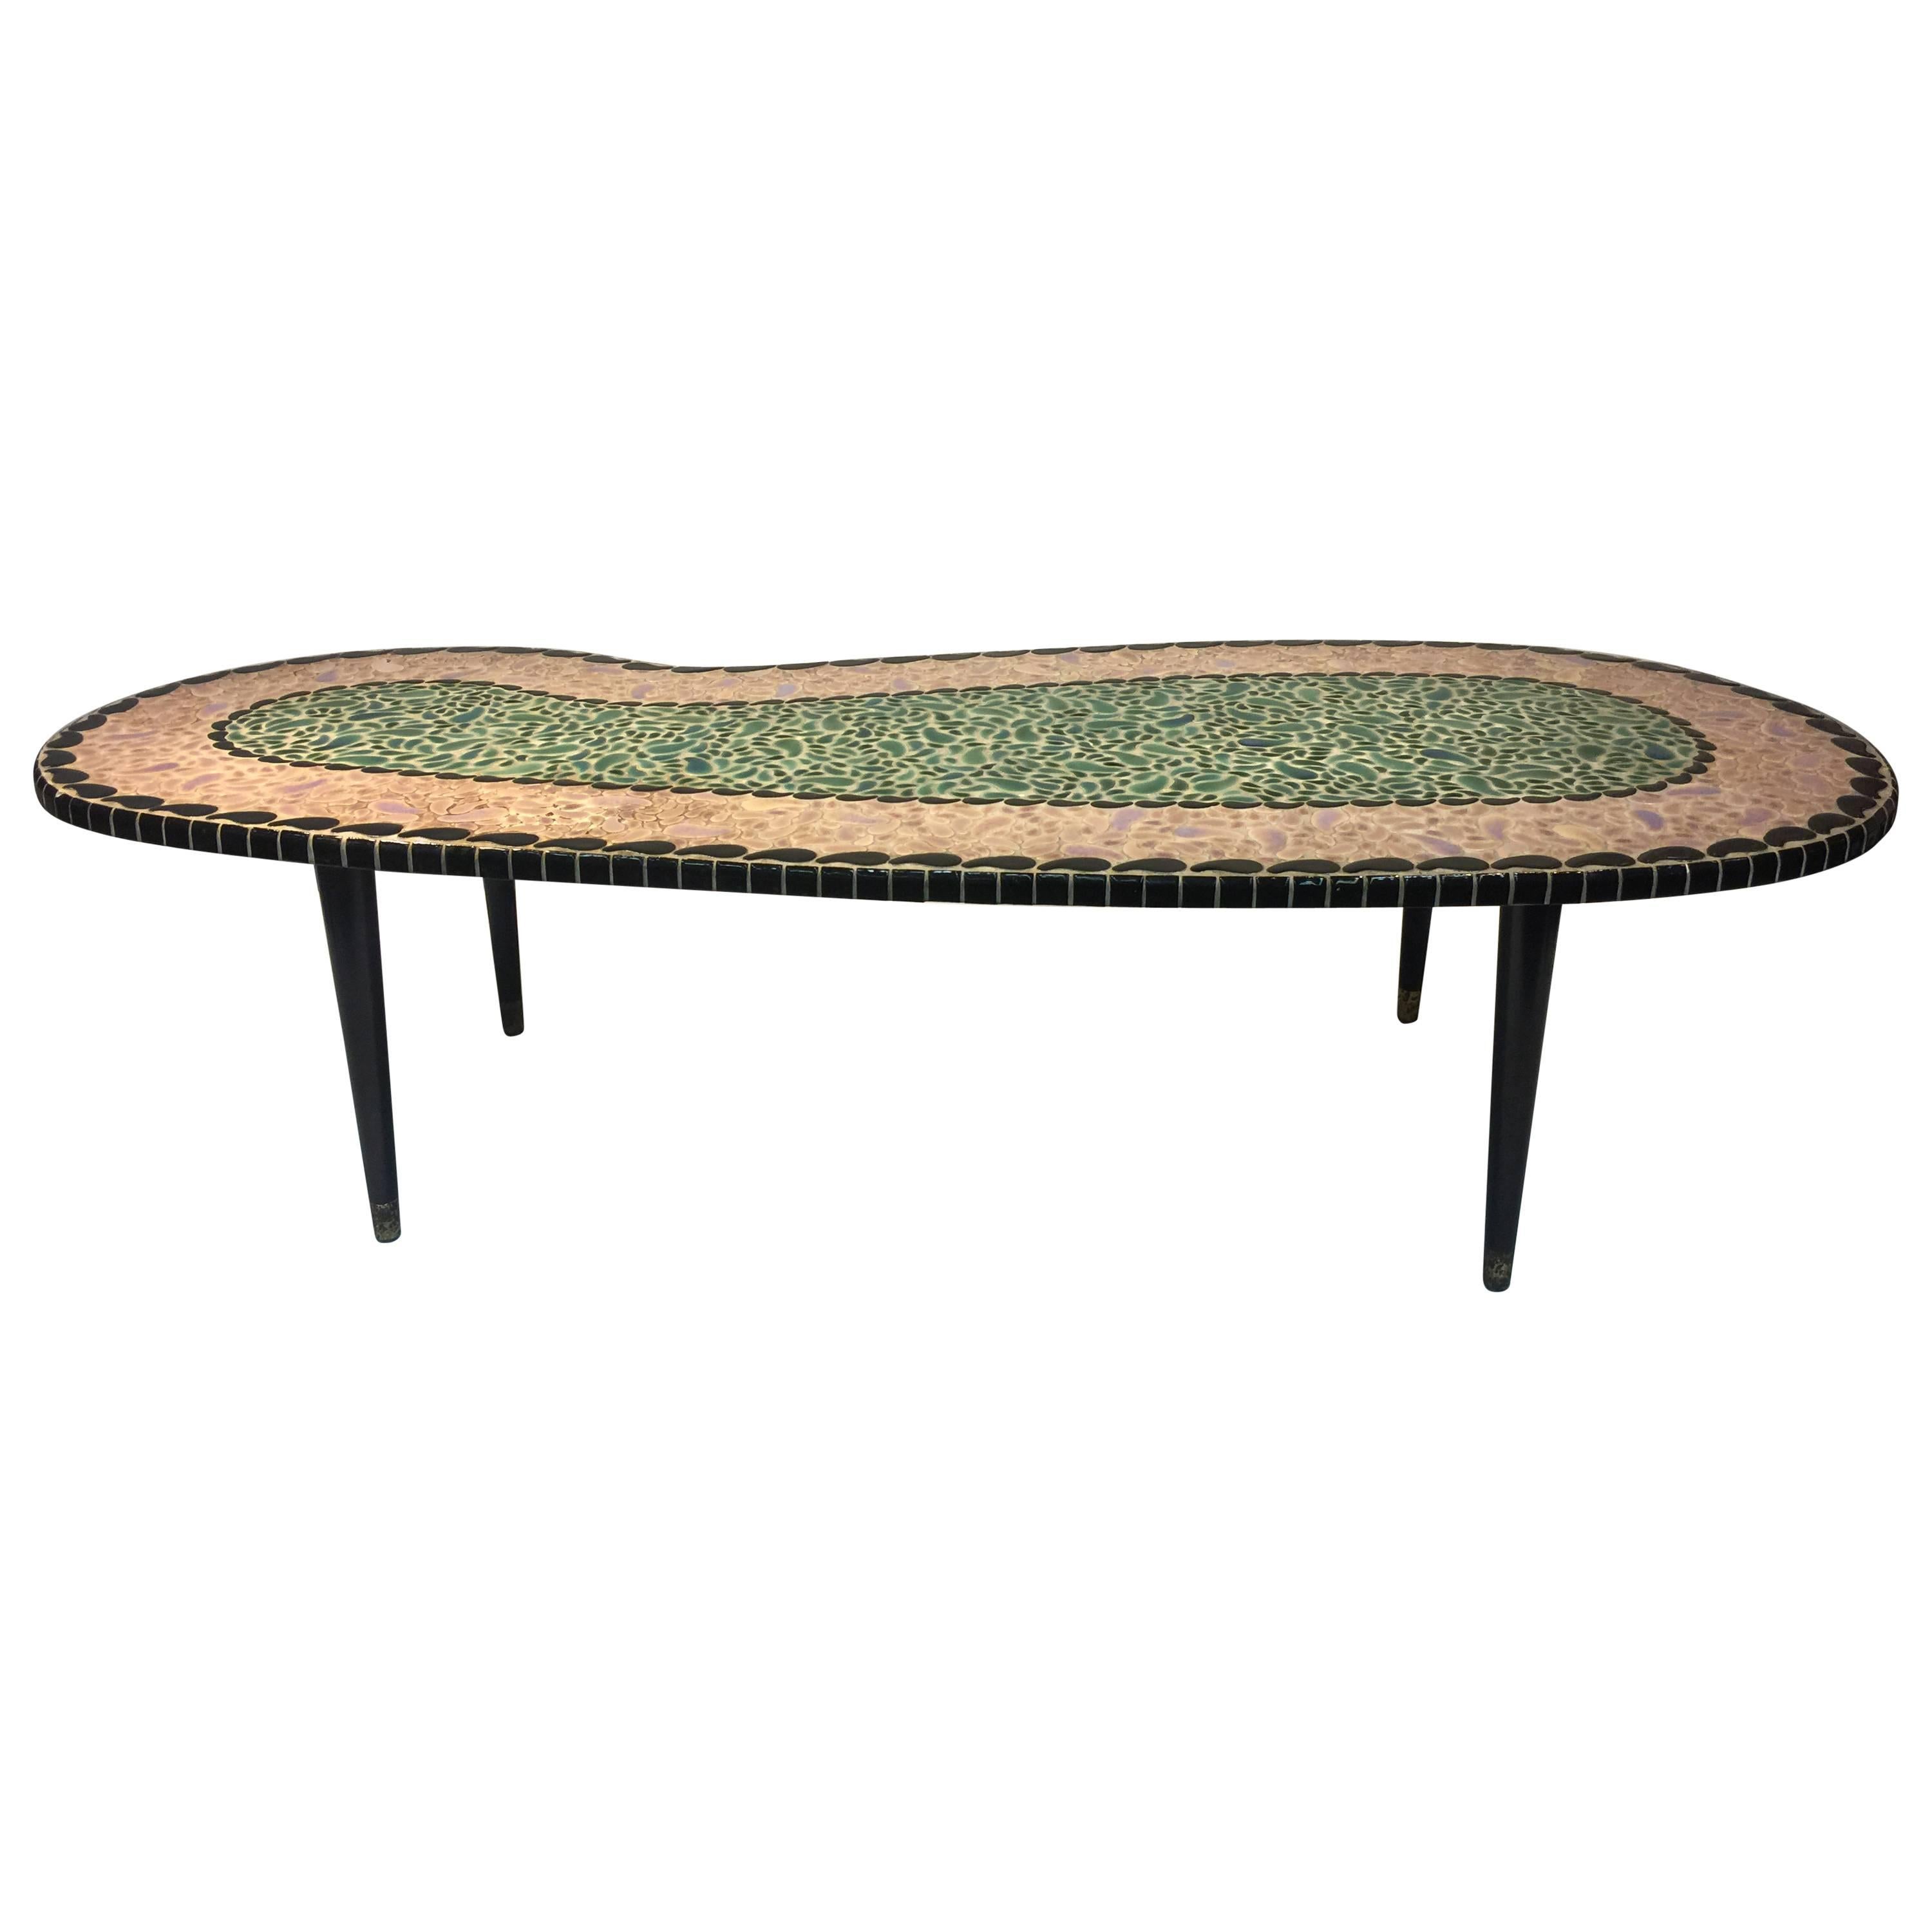 Magnificent Mosaic Tile Top Coffee Table in an Unusual Kidney Shape For Sale